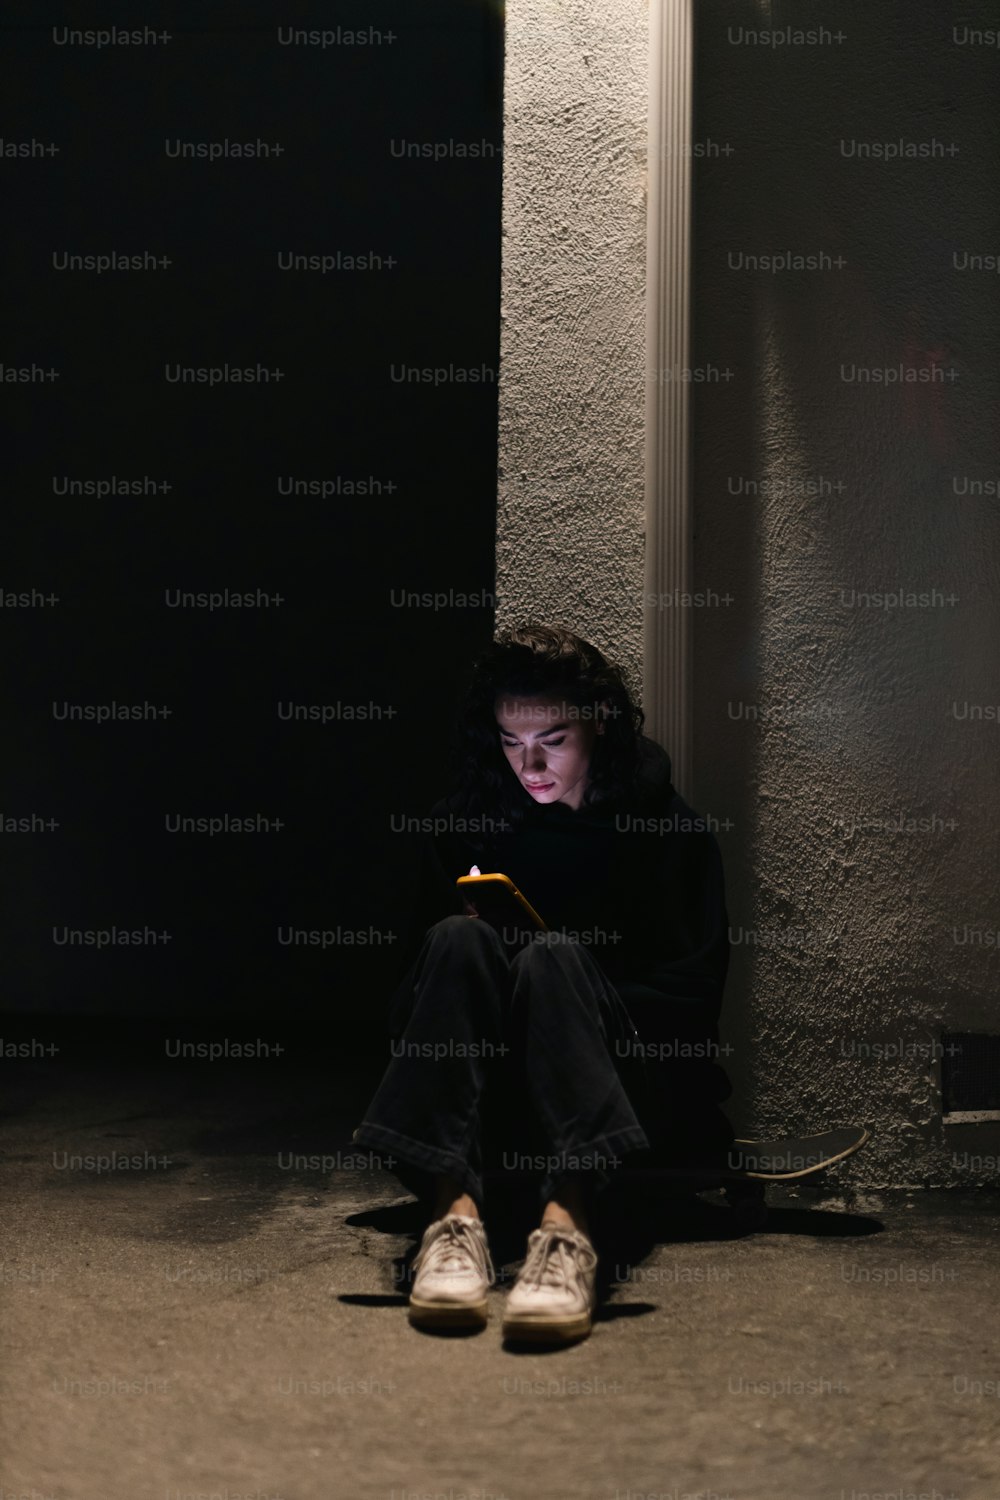 a person sitting on the ground with a cell phone